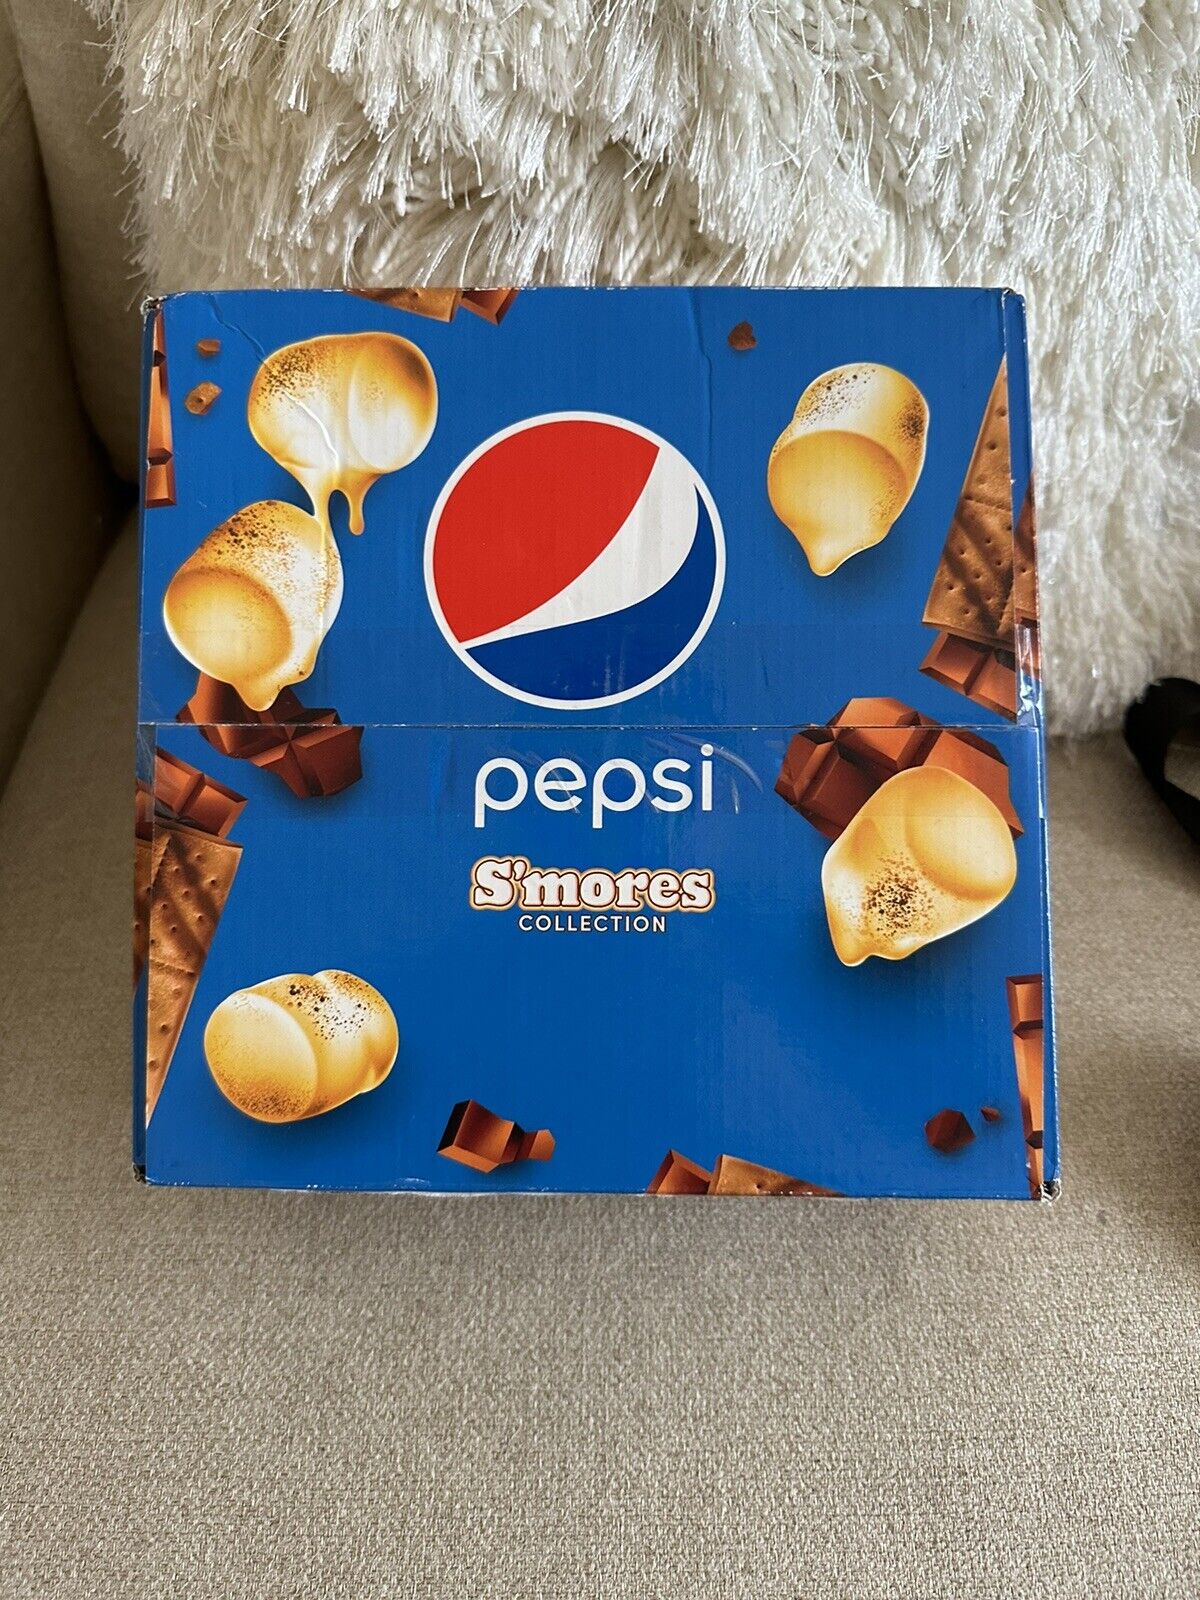 Pepsi S’mores Limited Edition 3 Cans Collection